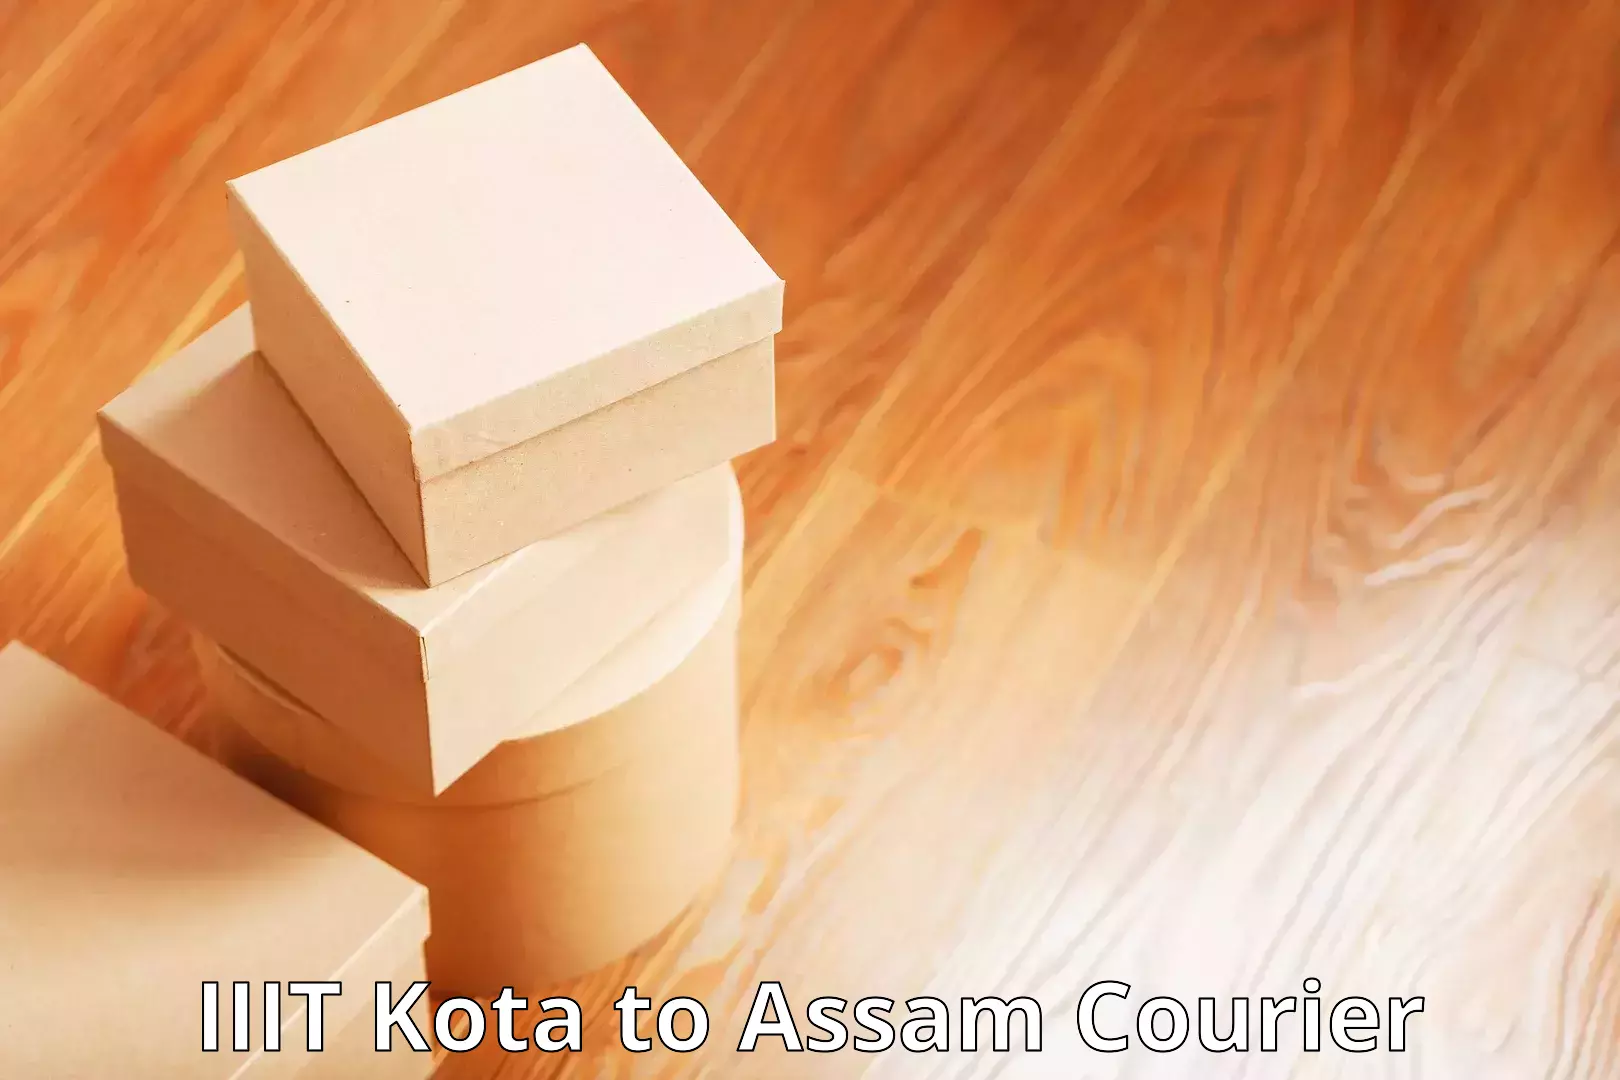 Small parcel delivery IIIT Kota to Guwahati